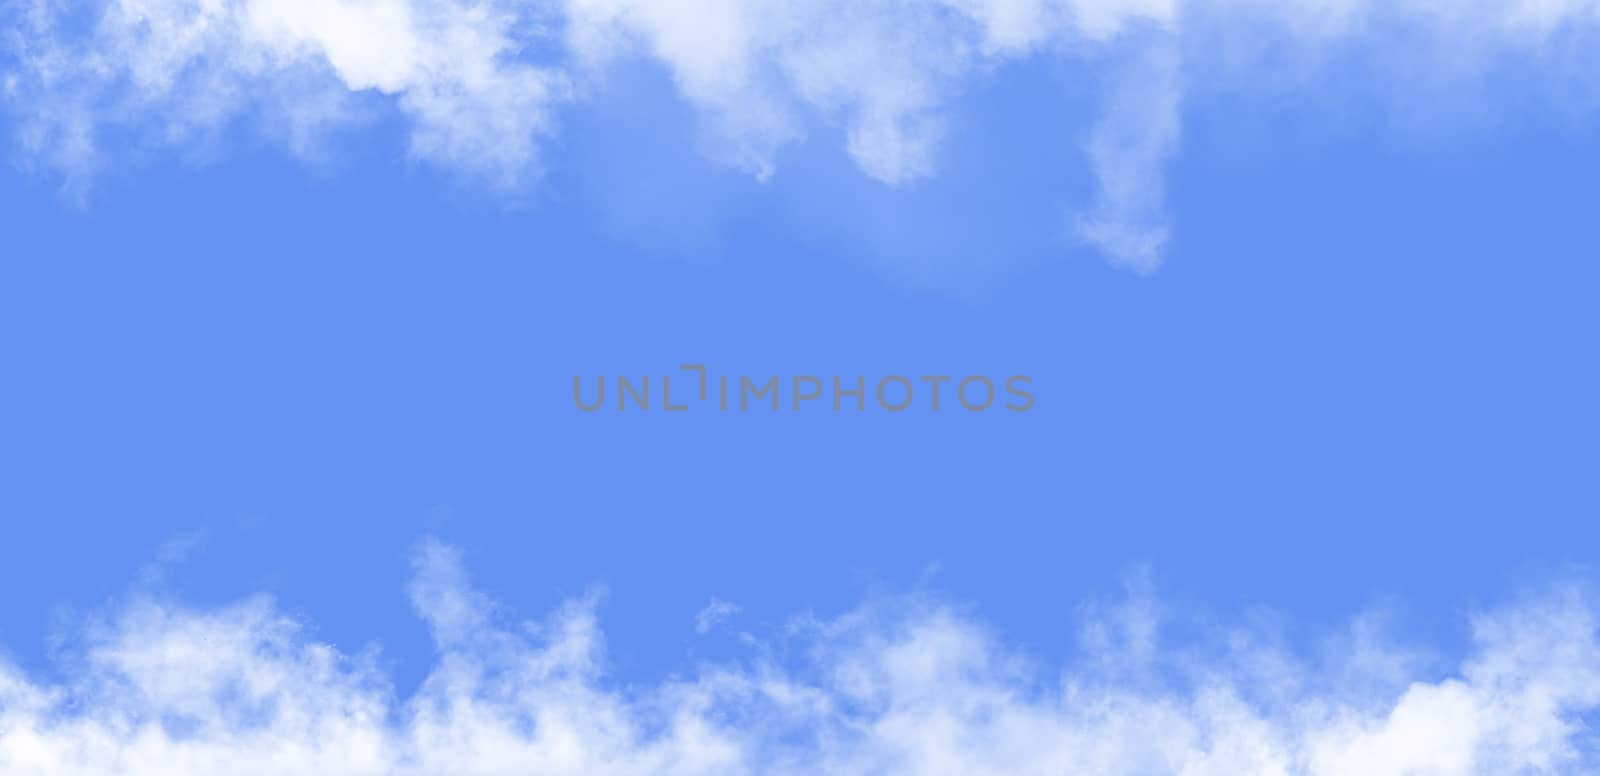 Abstract background, blue sky with clouds close-up